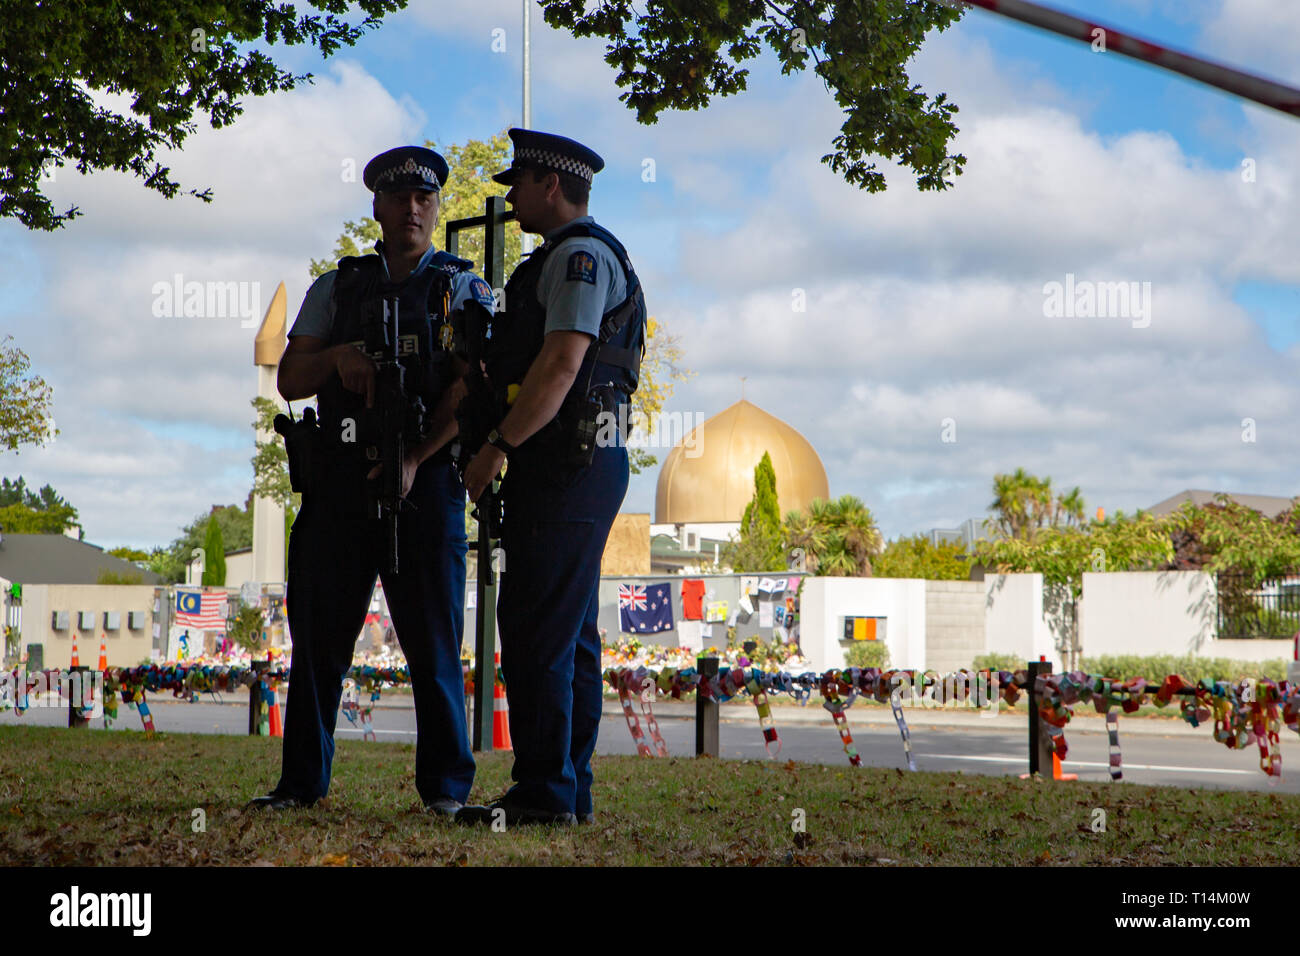 Christchurch, New Zealand, March 22 2019: Policeman silhouetted in front of the Masij El Noor as they stand guard at the Memorial Service to remember Stock Photo